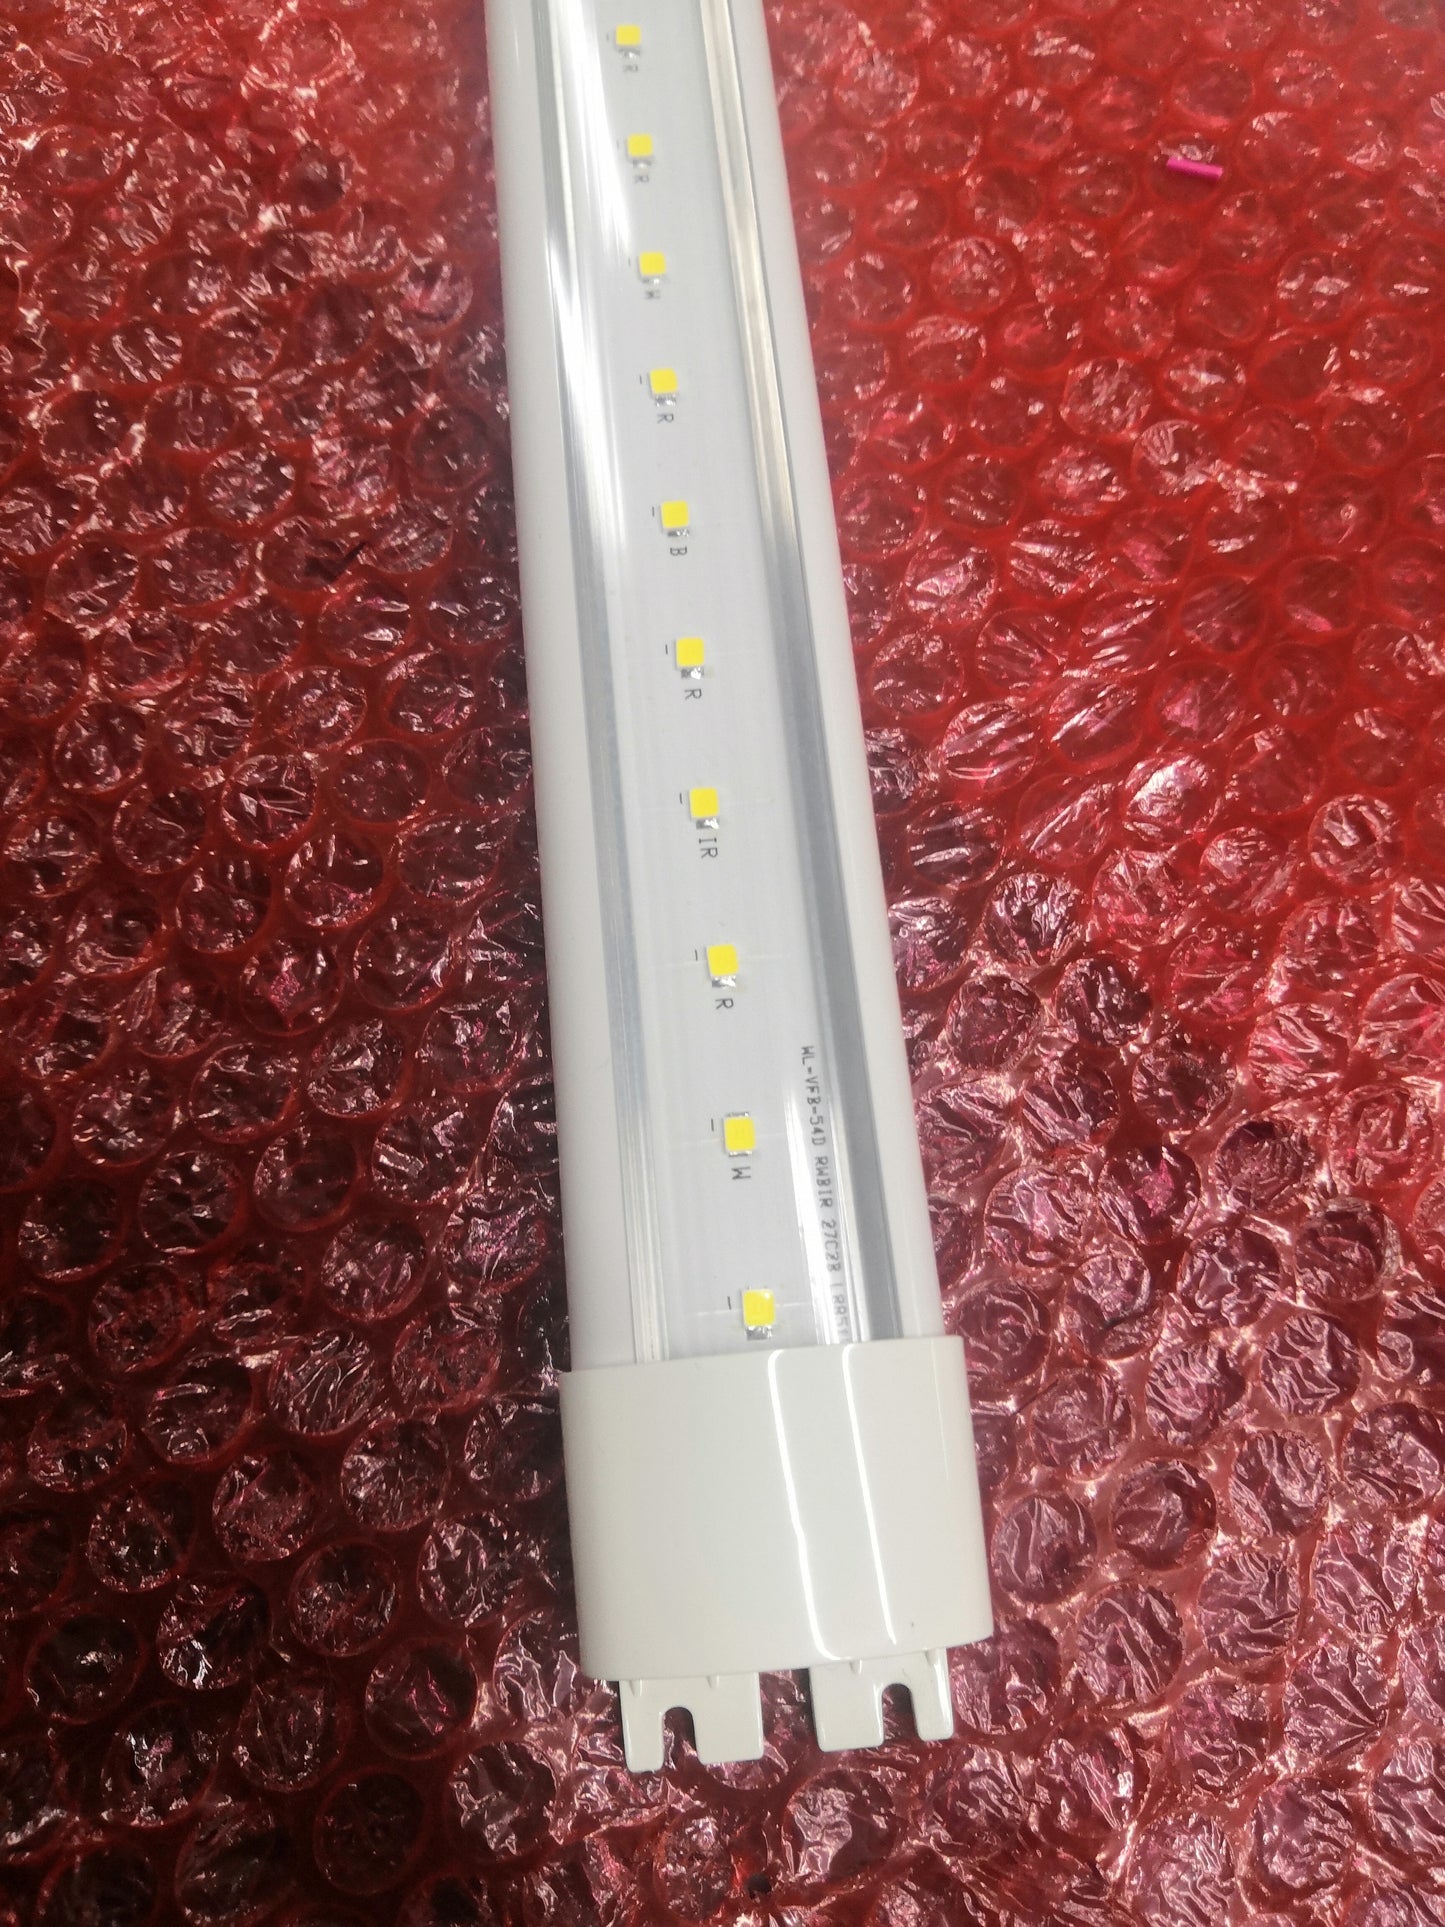 40W-60W LED Grow Tube Light For Vertical Farming Leaf Greens/Strawberry Growing